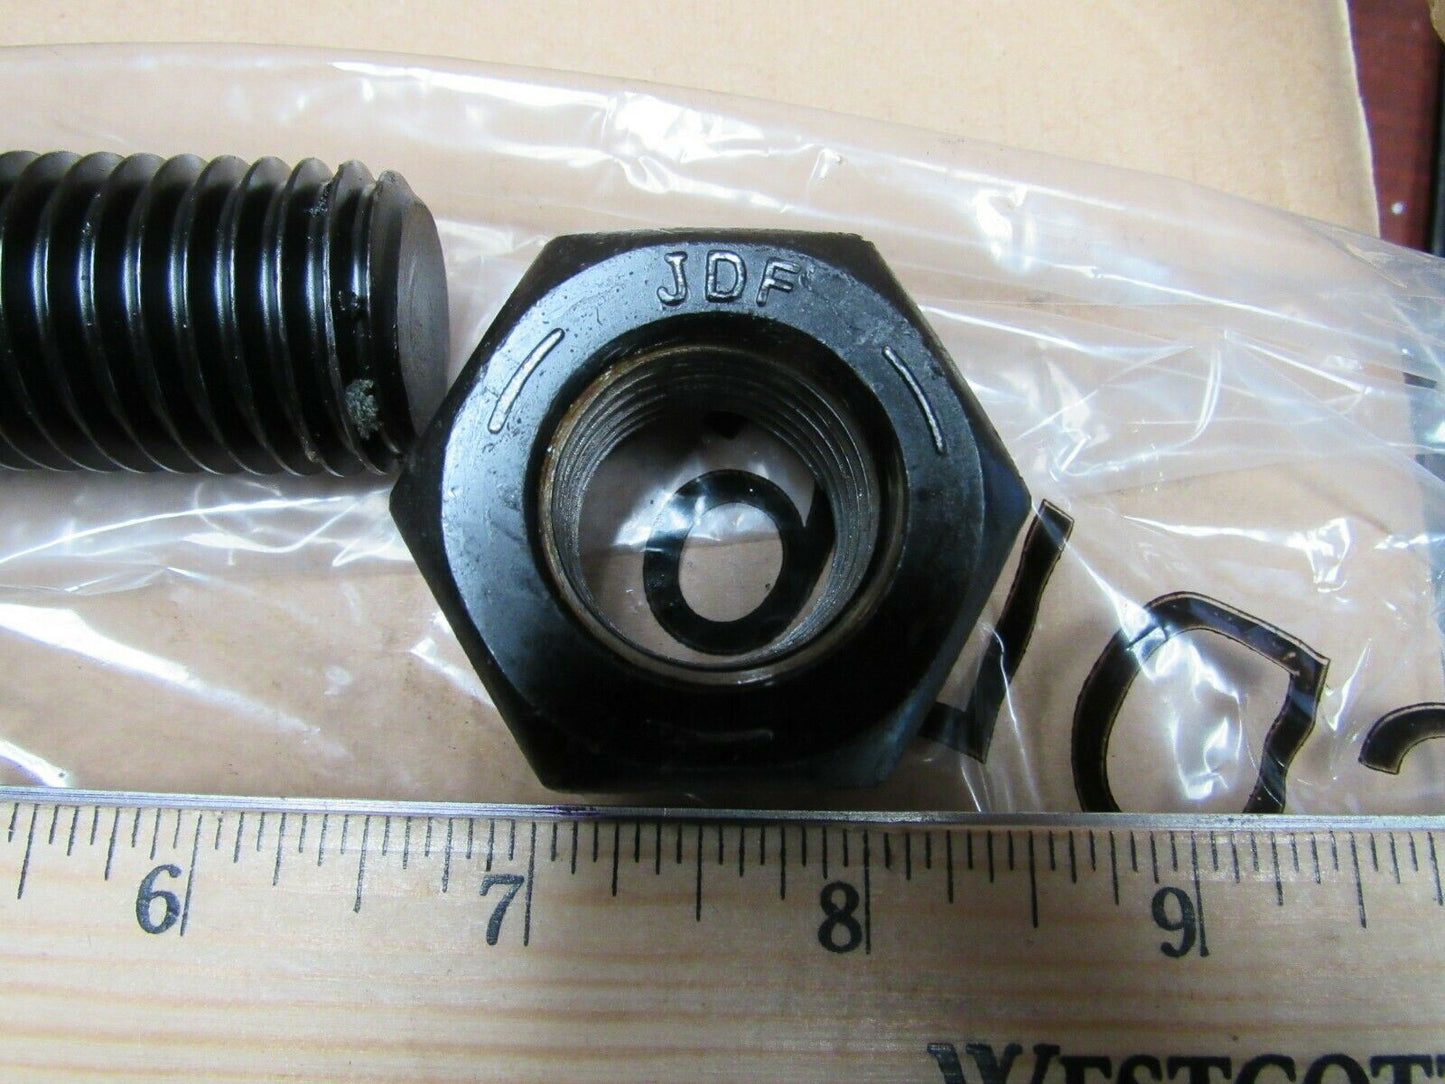 (5) Fabory 1"-8 Steel Structural Bolt with Nut, A325 Type 1, A563-C, 6-1/2"L (184196257968-BT33)